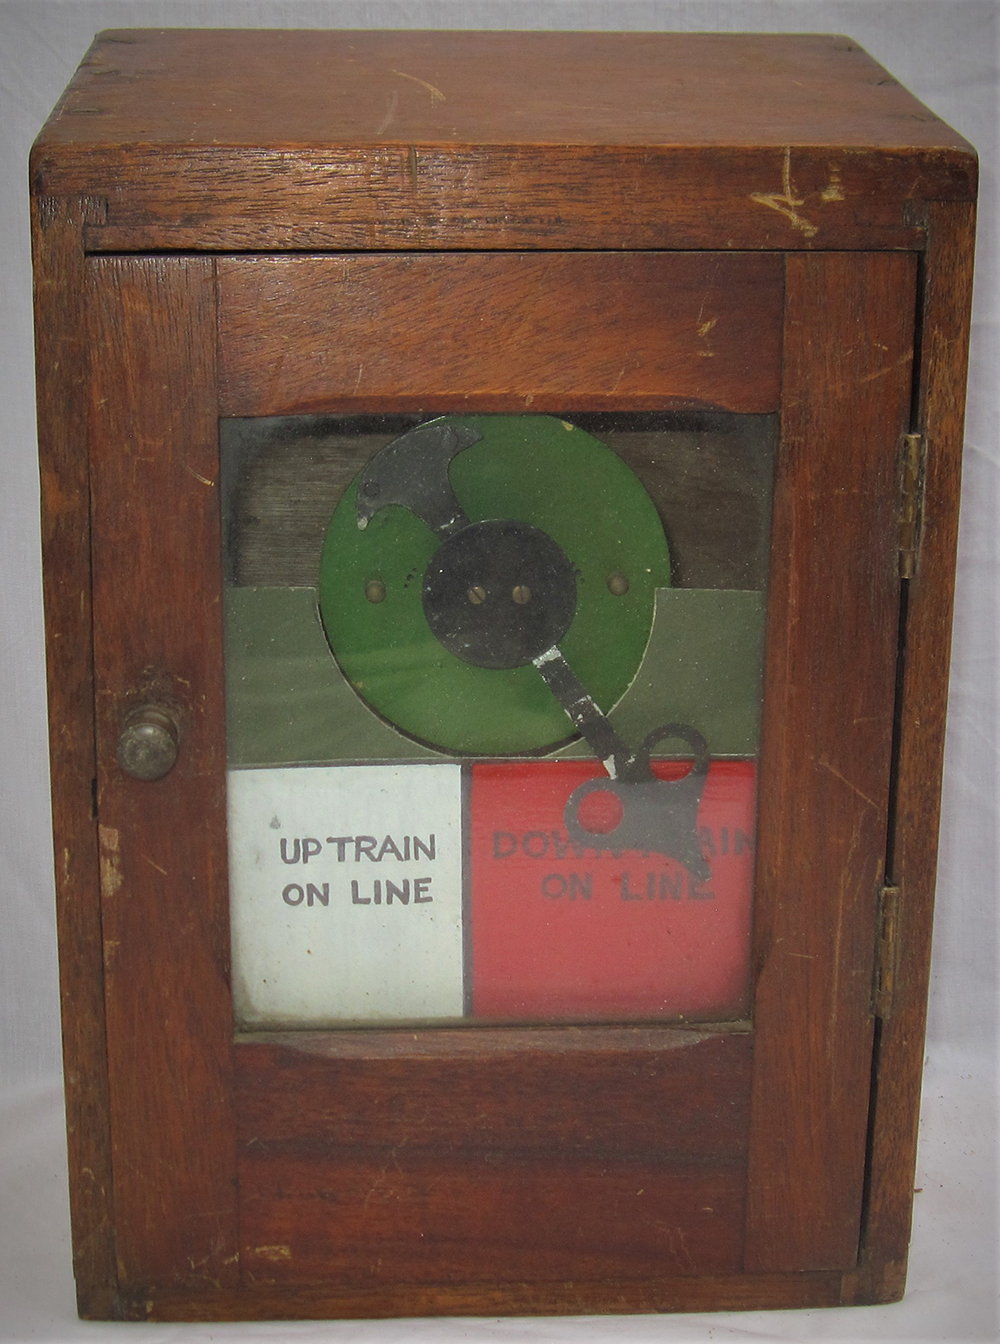 GNR CROSSING KEEPER instrument mounted into wooden protection box. Indicator will show UP TRAIN ON